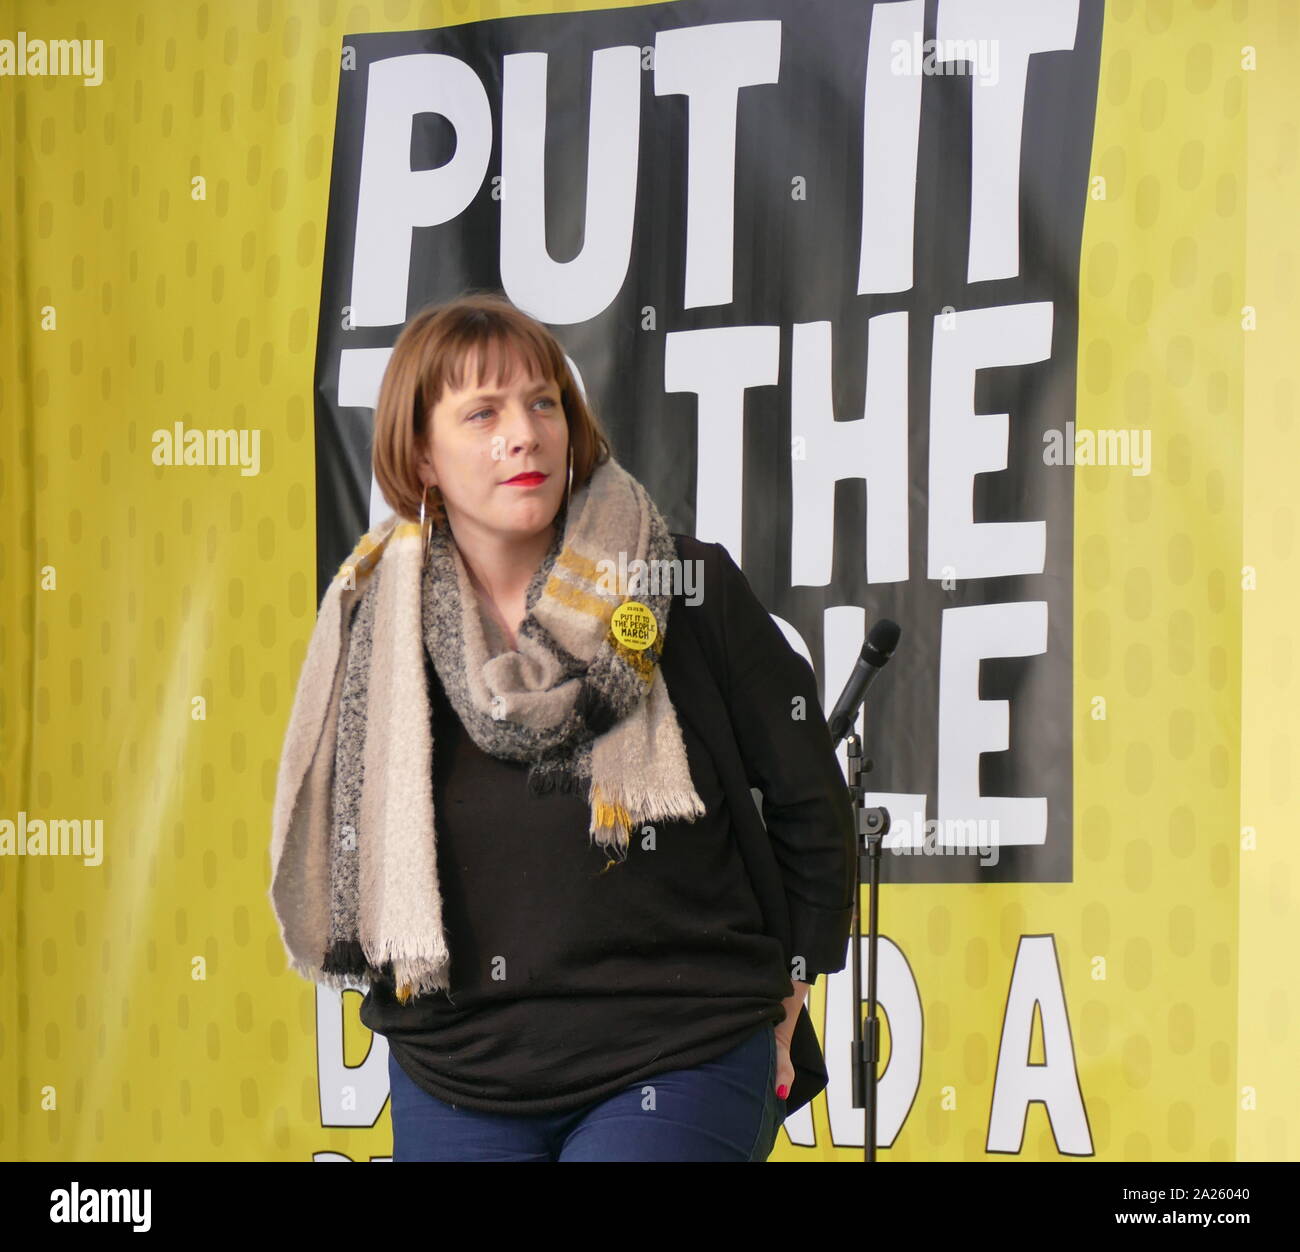 Jess Phillips, Labour Member of Parliament (MP) for Birmingham Yardley, addresses the 'People's Vote' march in Parliament Square, London. The People's Vote march took place in London on 23 March 2019 as part of a series of demonstrations to protest against Brexit, call for a new referendum, and ask the British Government to revoke Article 50. It brought to the capital hundreds of thousands of protestors, or over a million people according to the organizers. Stock Photo